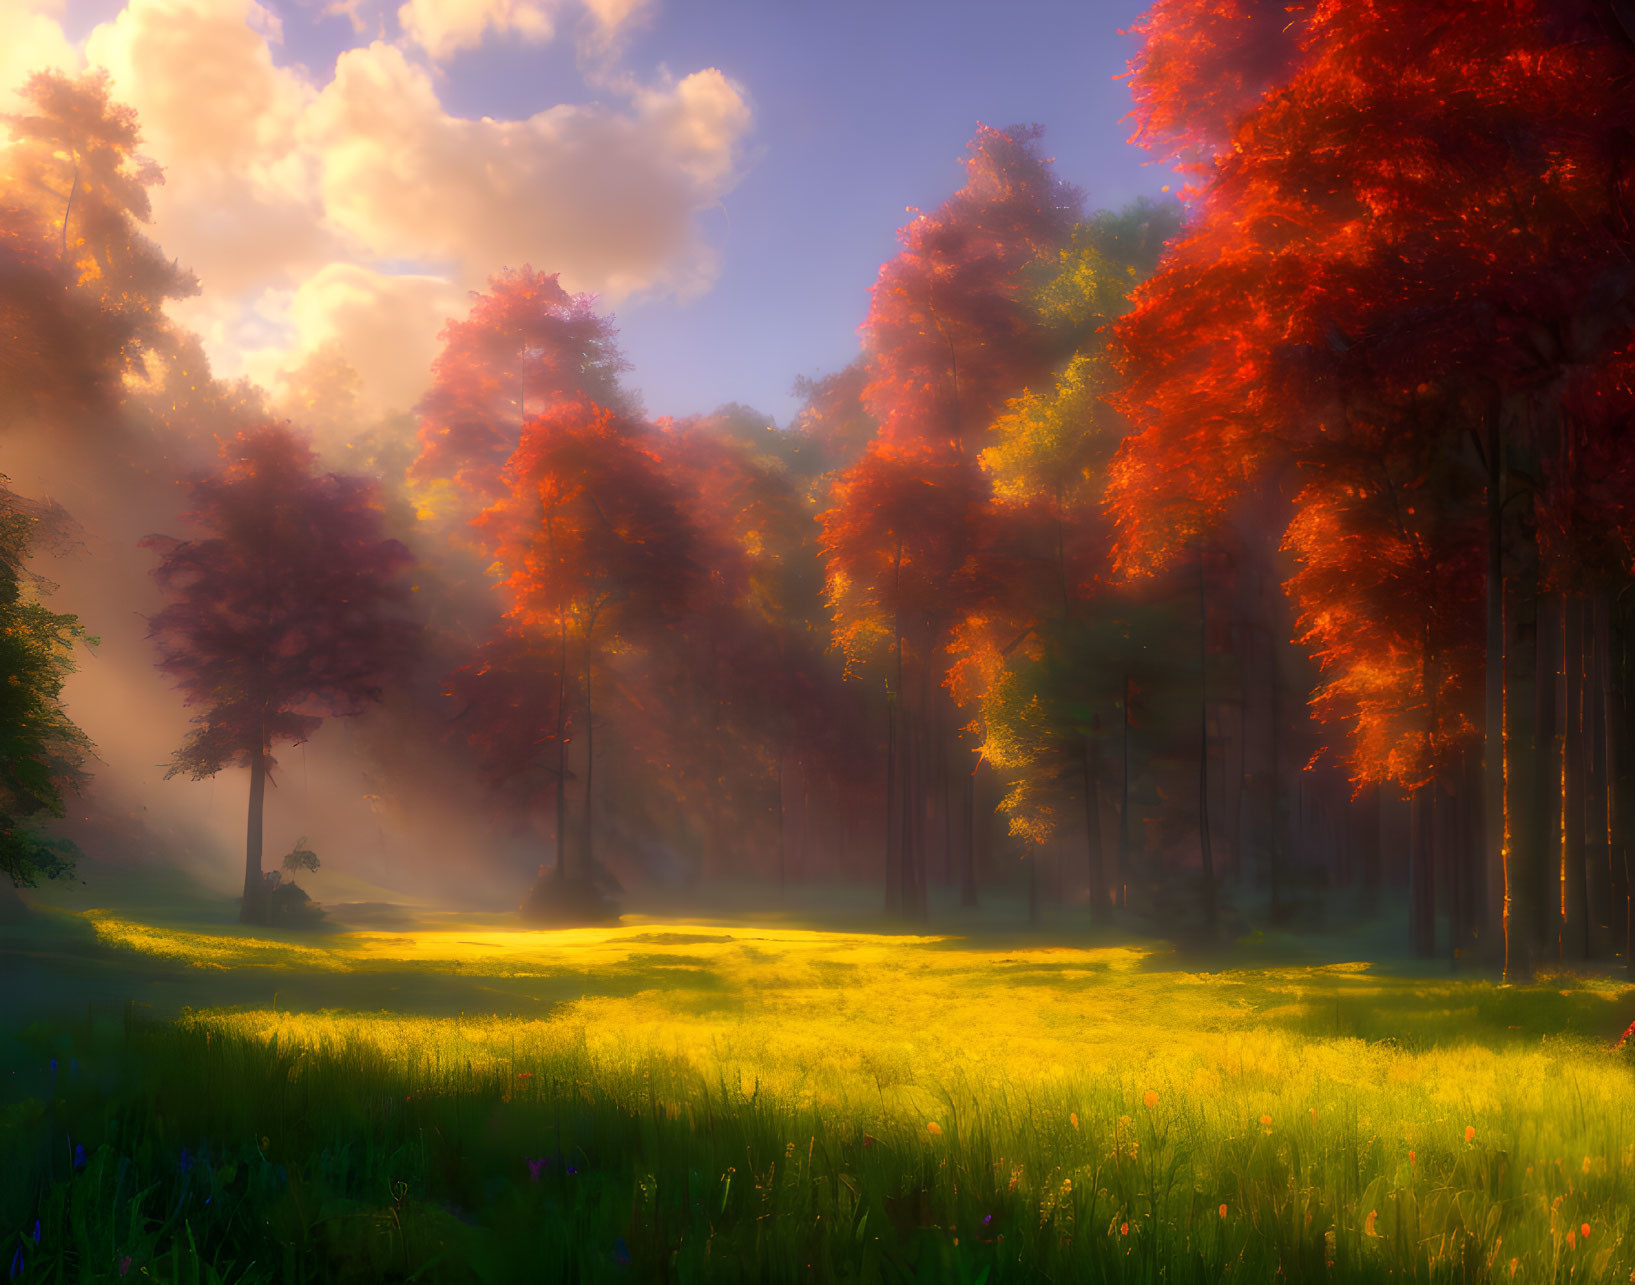 Tranquil forest glade at sunrise with autumn foliage and wildflowers